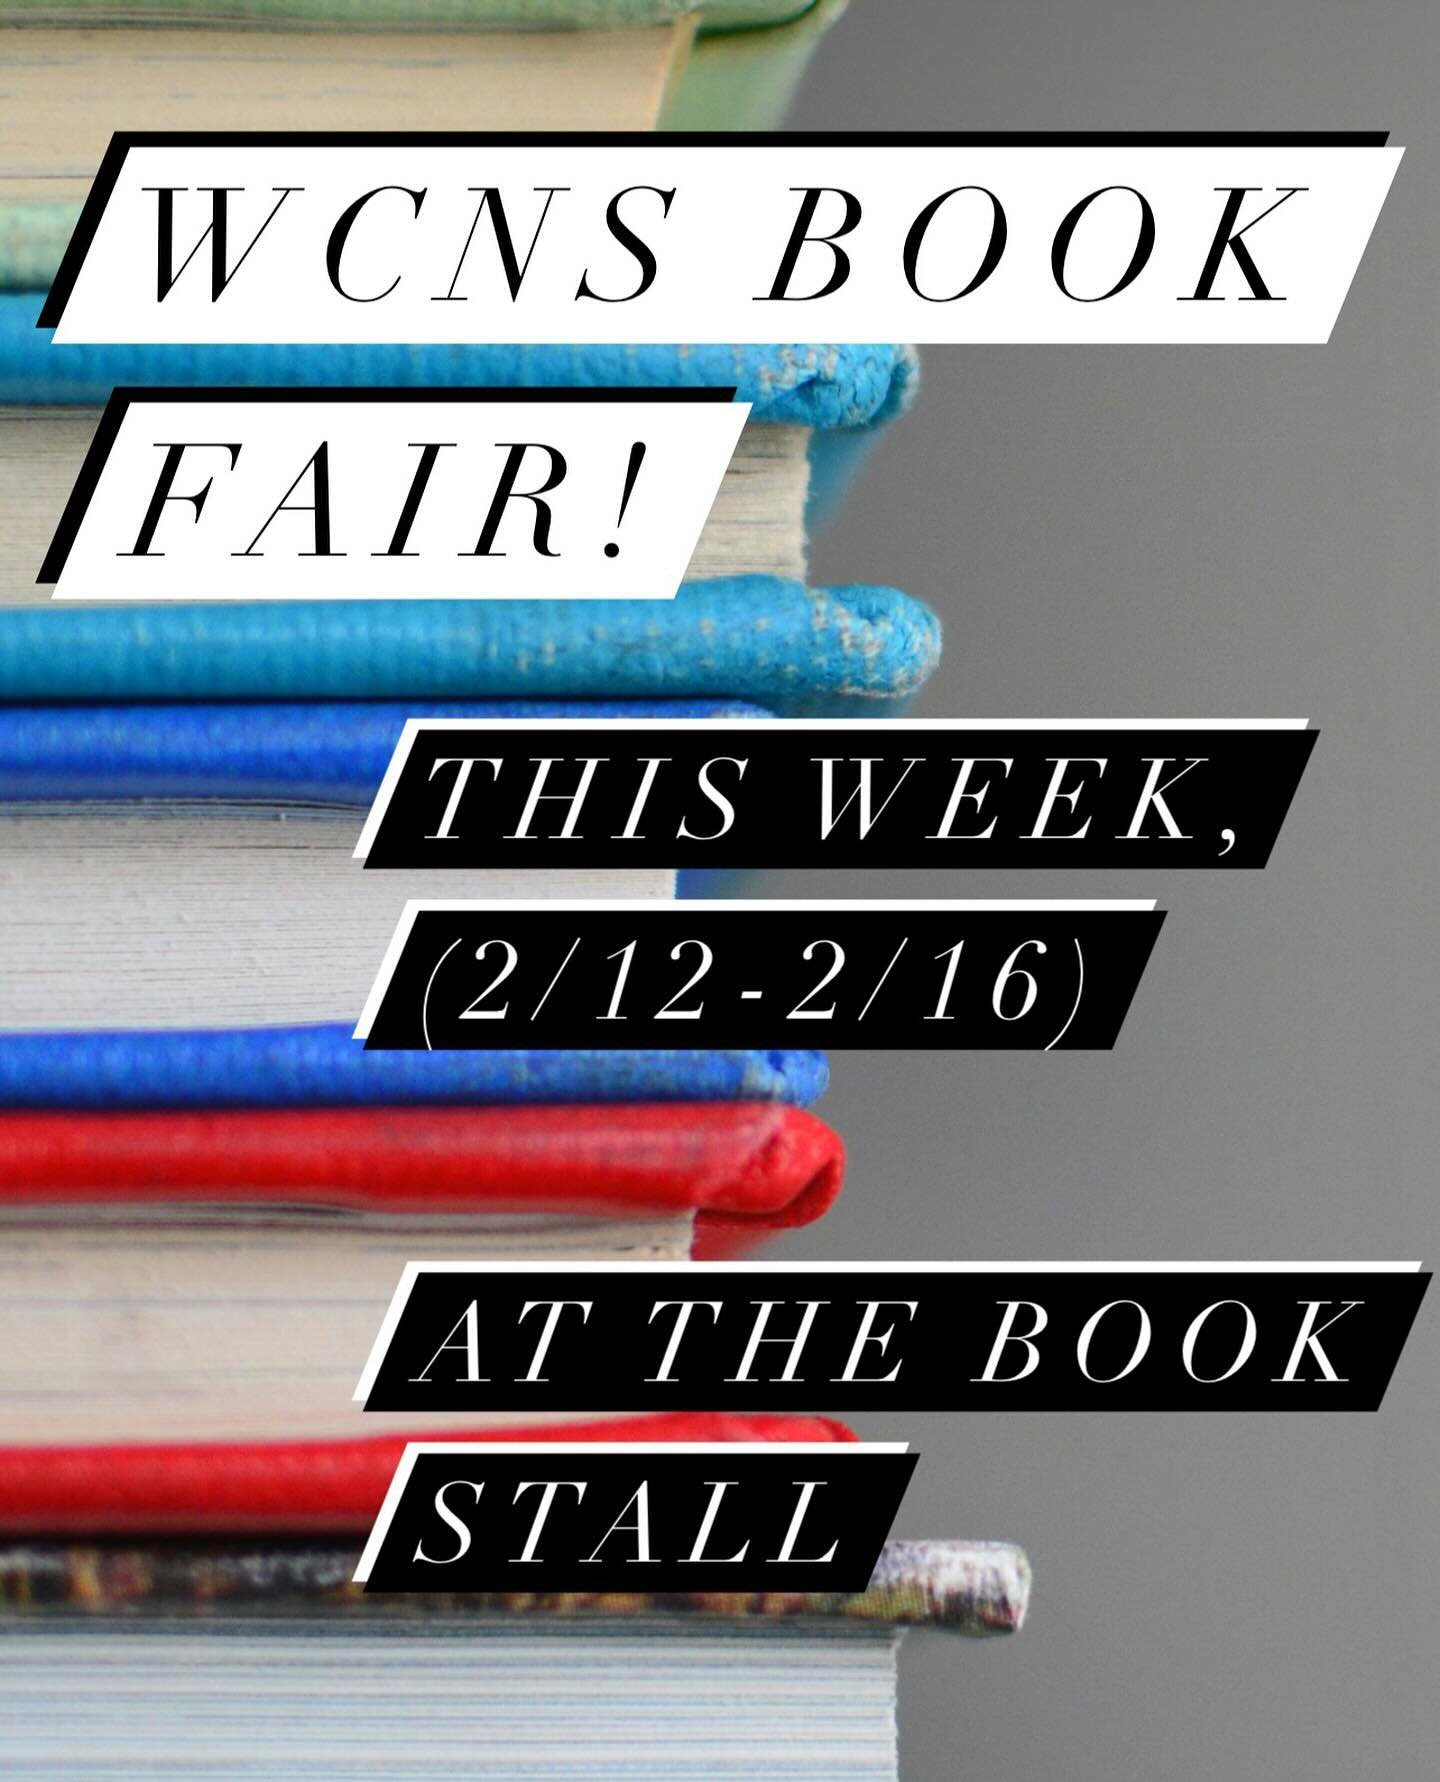 This Week (2/12-2/16), mention WCNS during checkout at the Book Stall, and 20% of your purchase will be donated back to WCNS!

This includes books, games, toys, and gift cards 📚